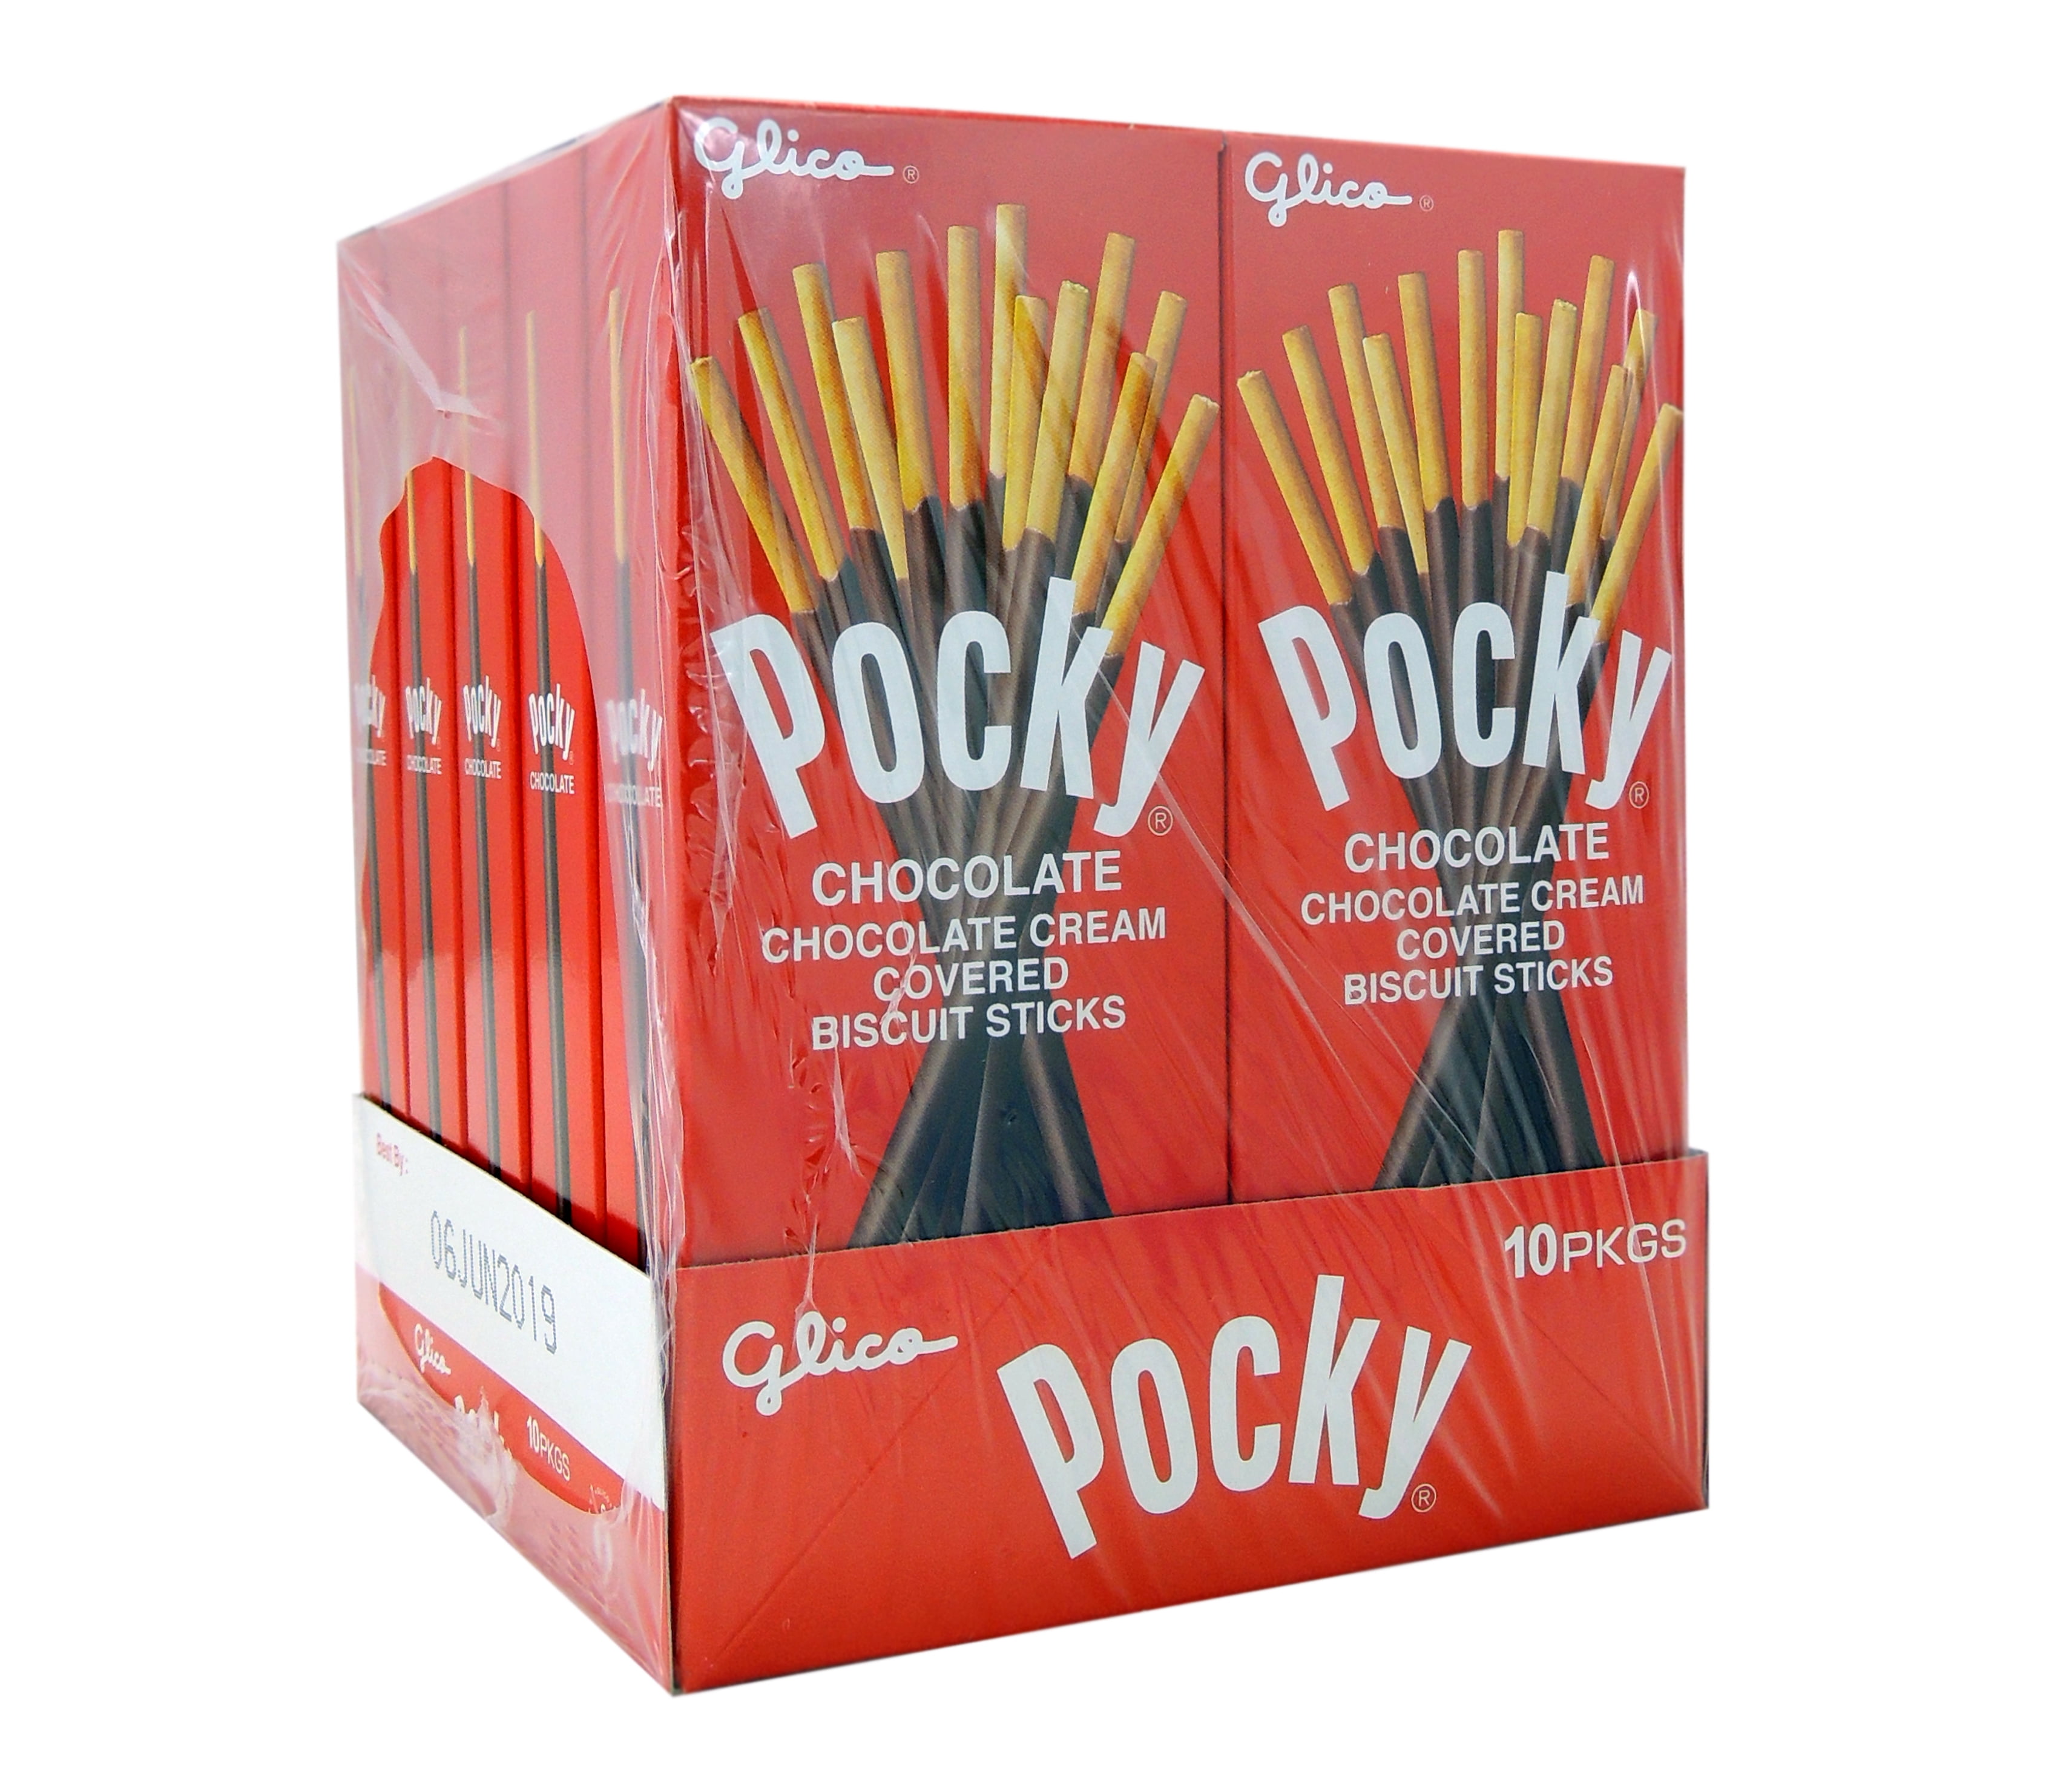 POCKY CHOCOLATE COVER BISCUIT STICK 10/1.41oz 